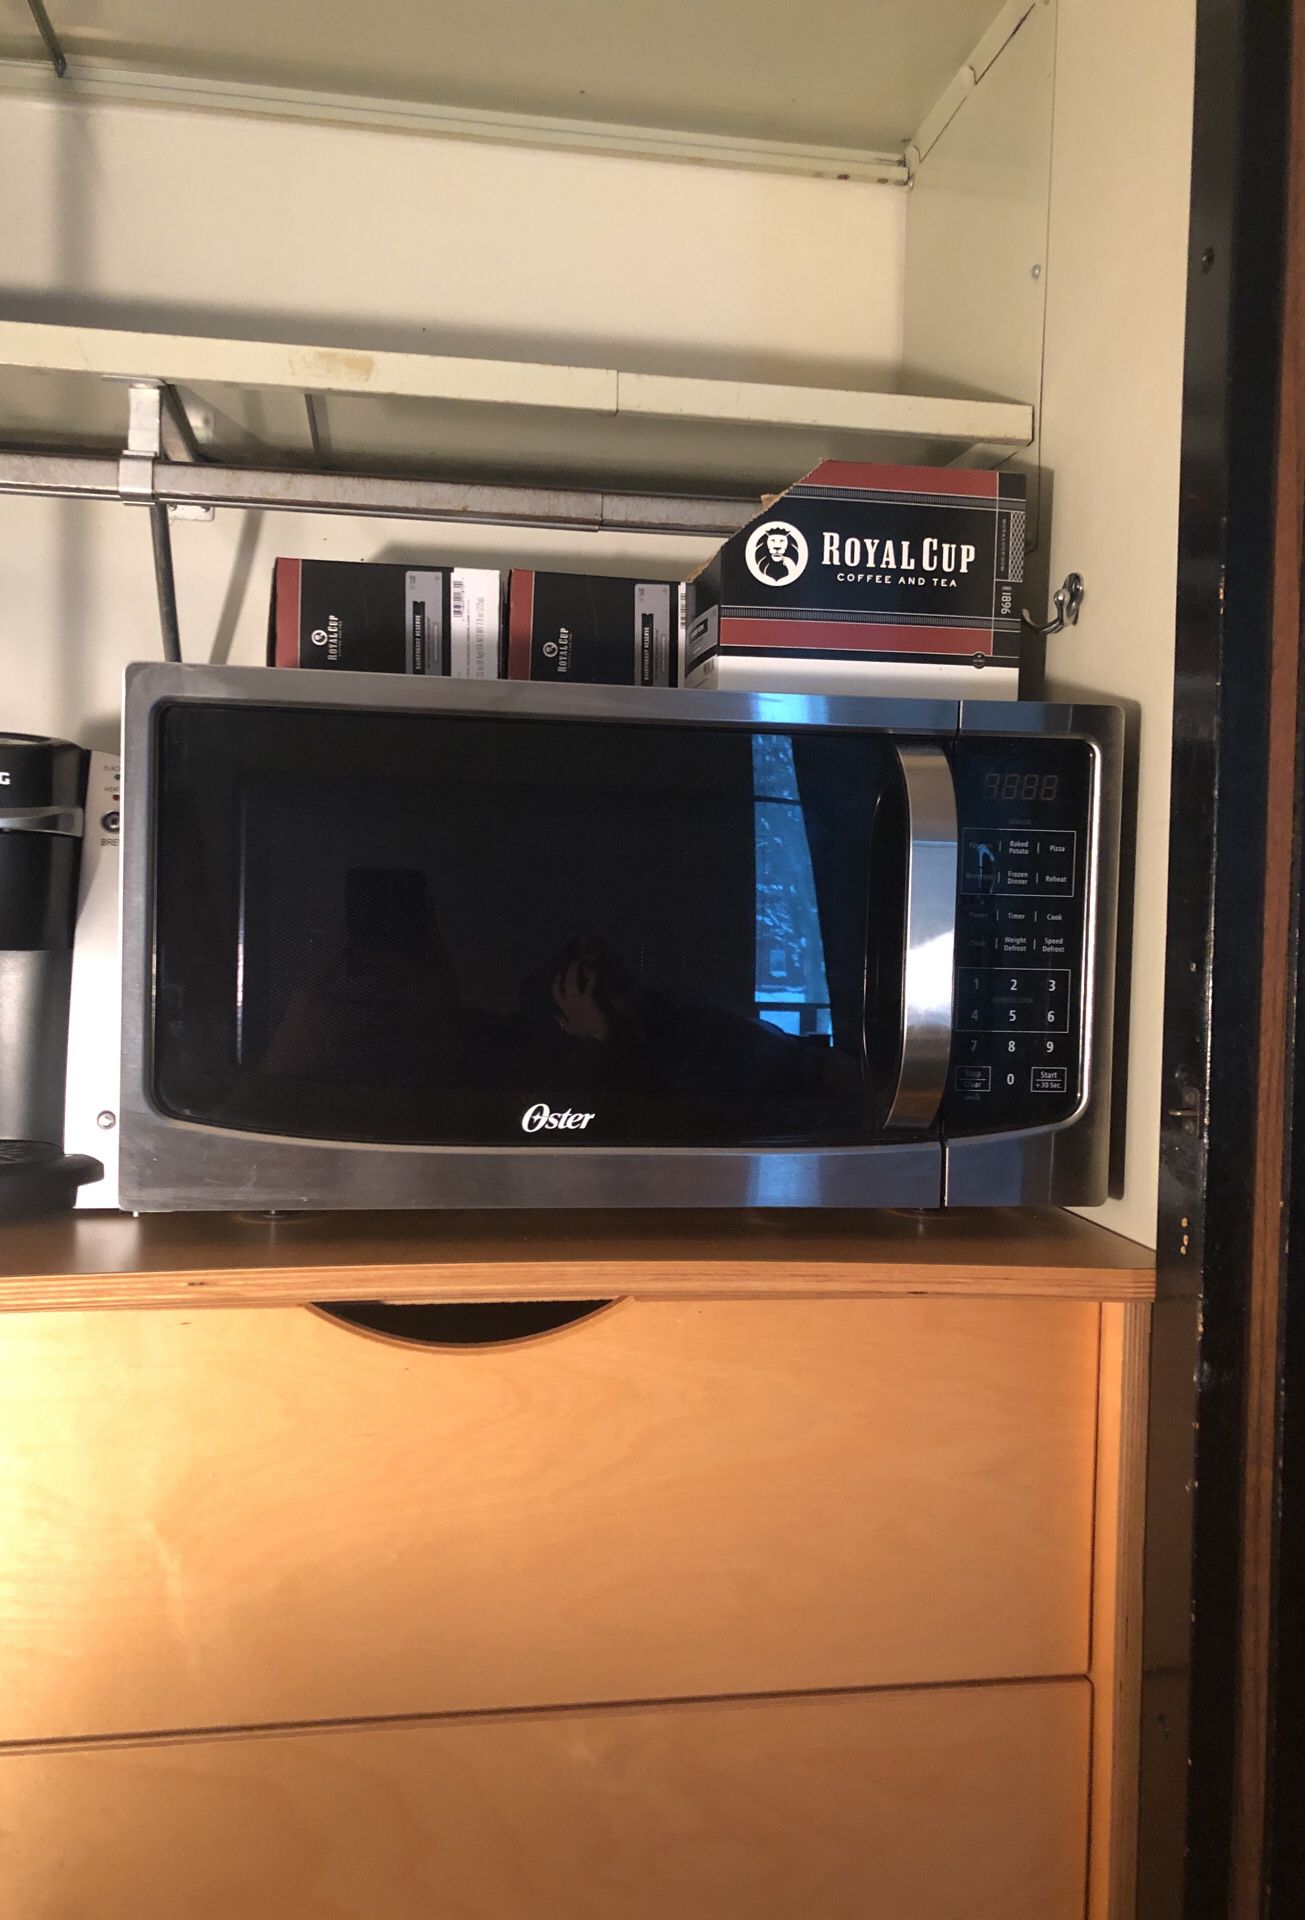 Microwave & Keurig (with coffee K-cups) for sale